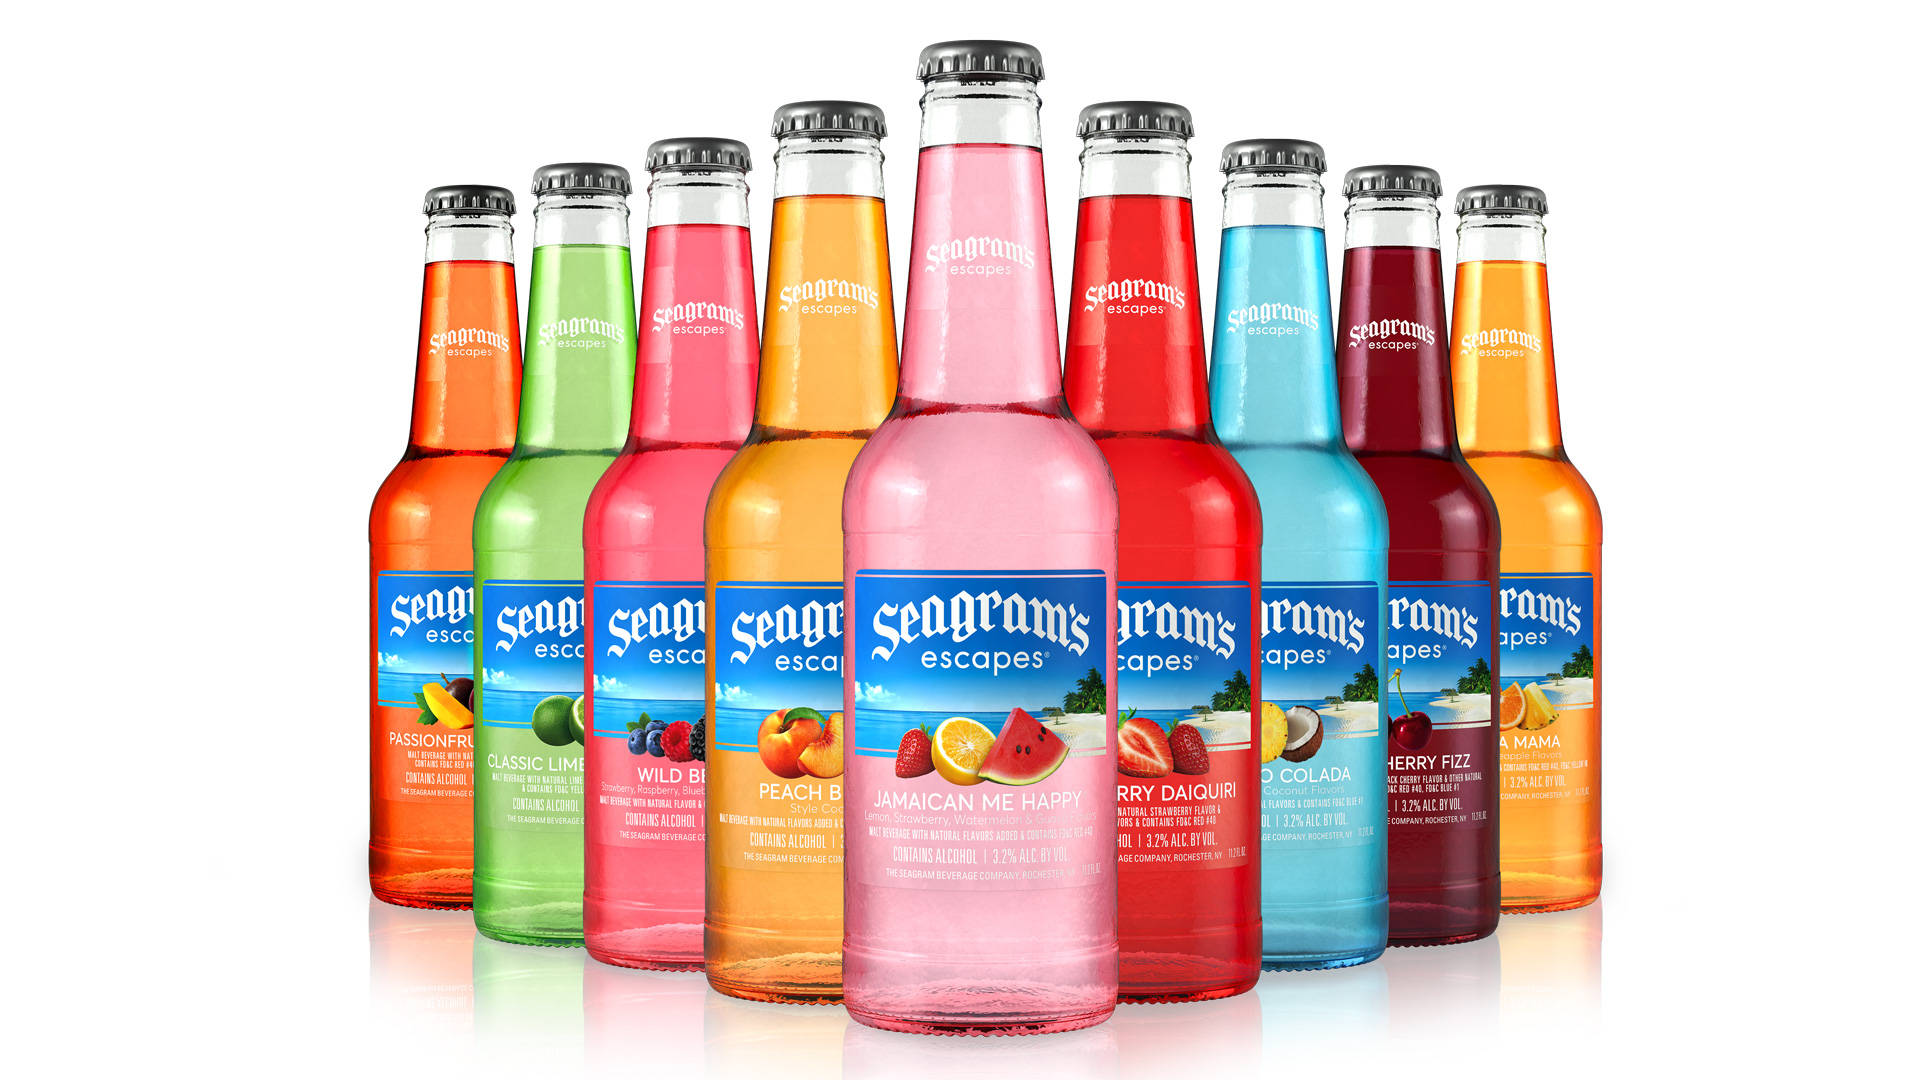 Seagrams Escapes Variety Mocktail Beverage Mix Wallpaper